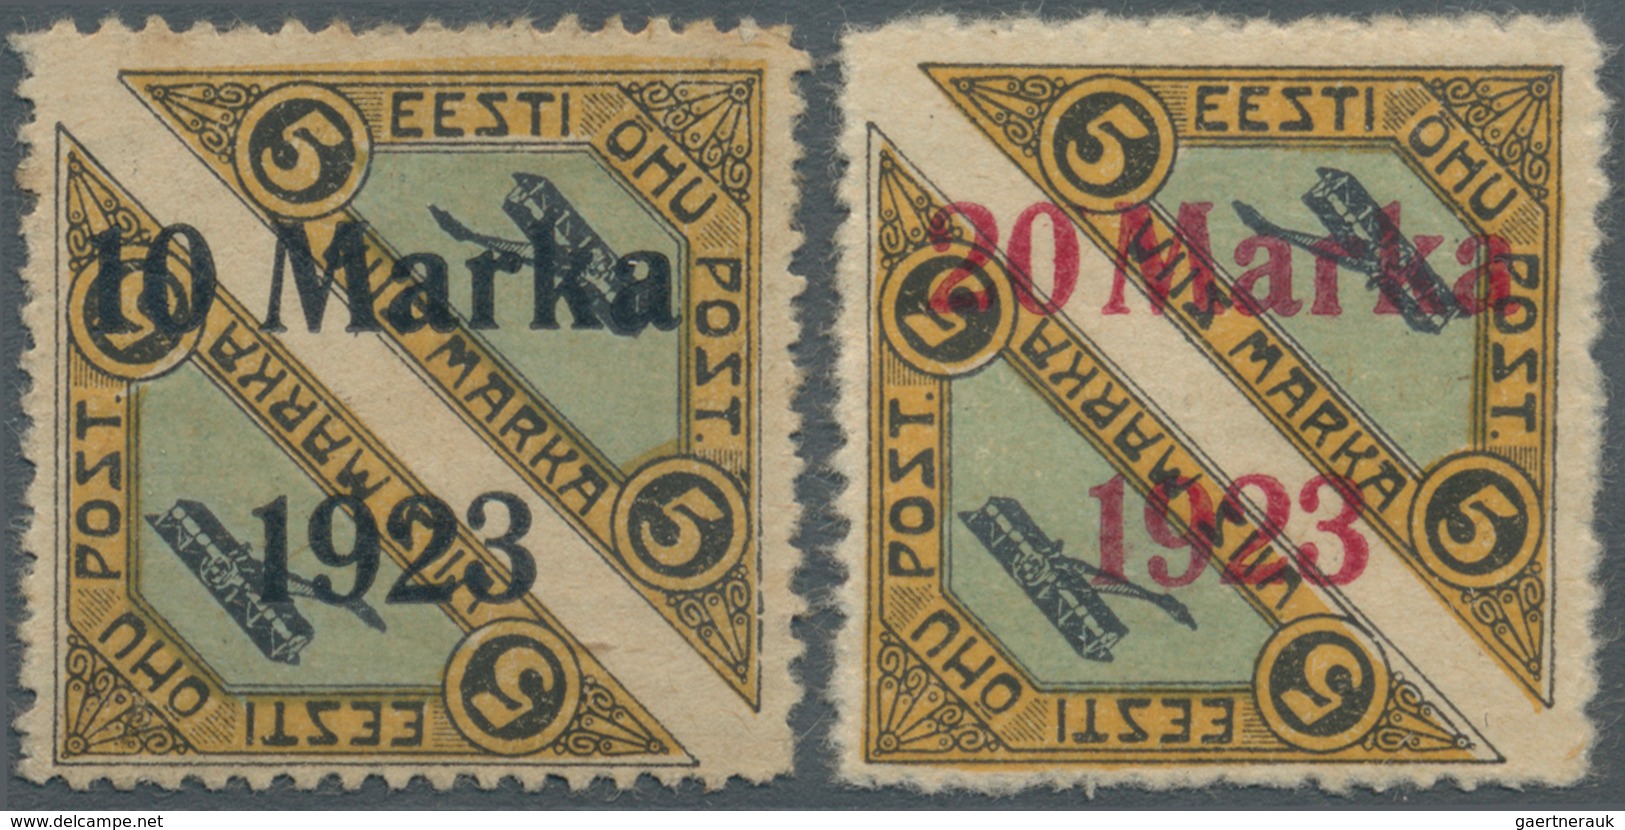 13509 Estland: 1923, Airmail 10 M. And 20 M. Perforated, Unused, Fine, Signed Bloch And Eichenthal, Fine, - Estland